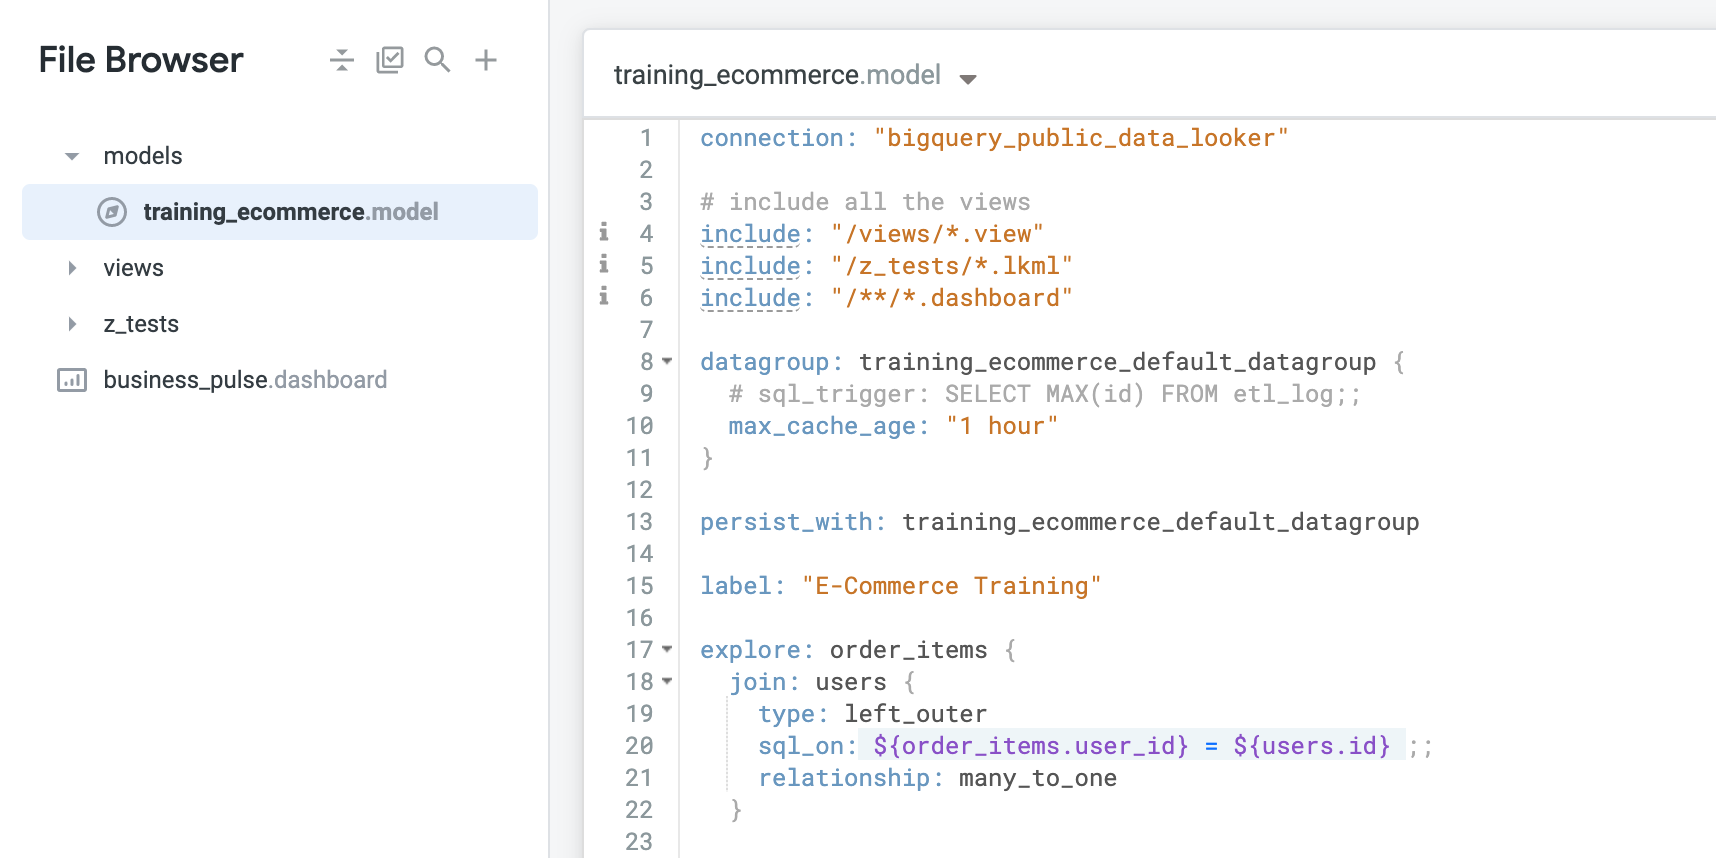 The training_ecommerce model opened, displaying several rows of data.